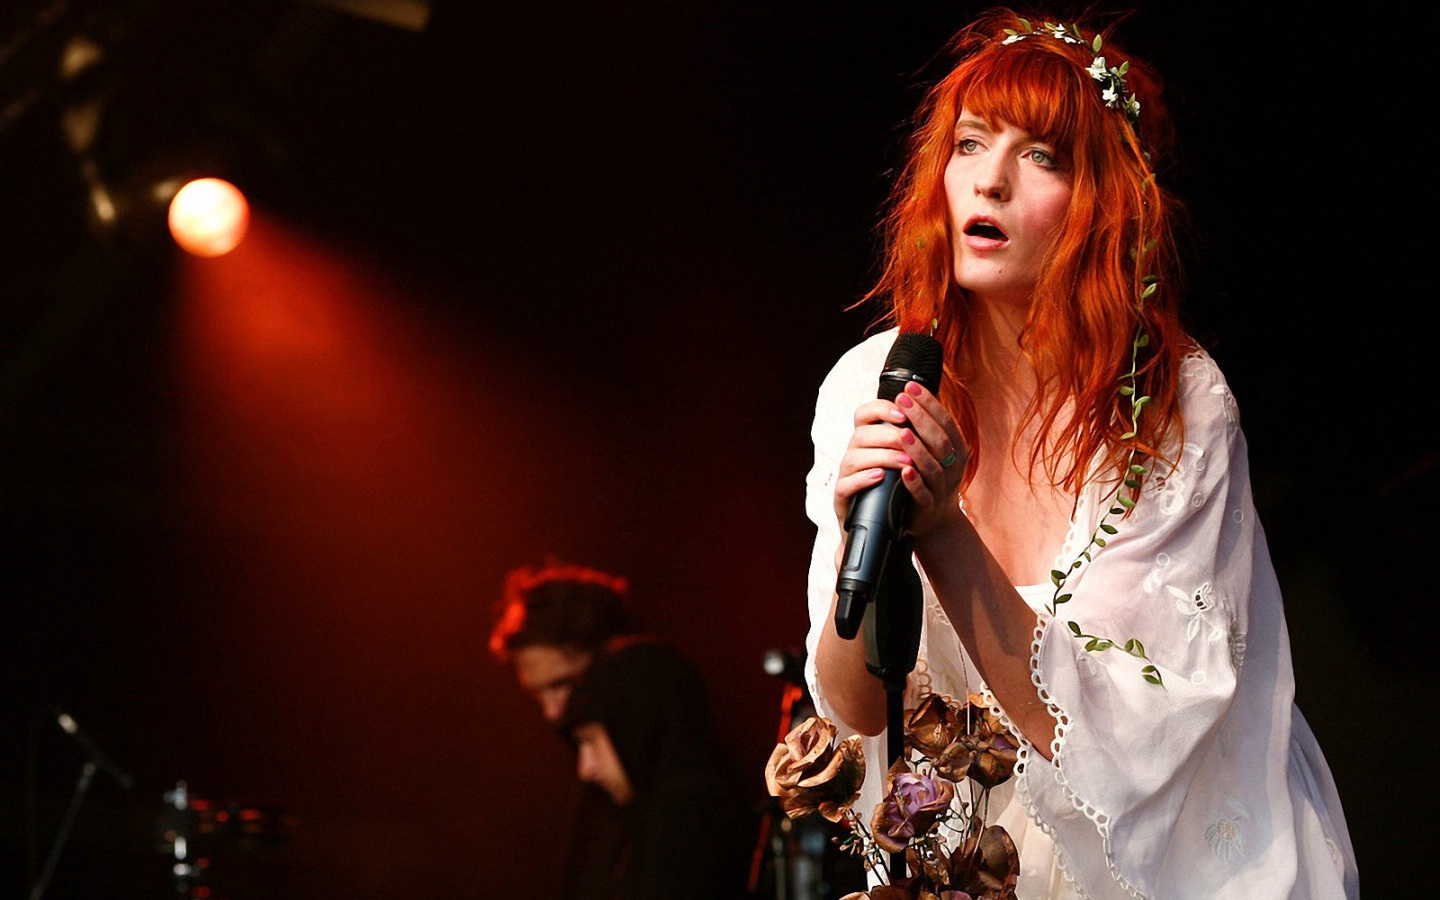 ws_Florence_and_the_Machine_1440x900